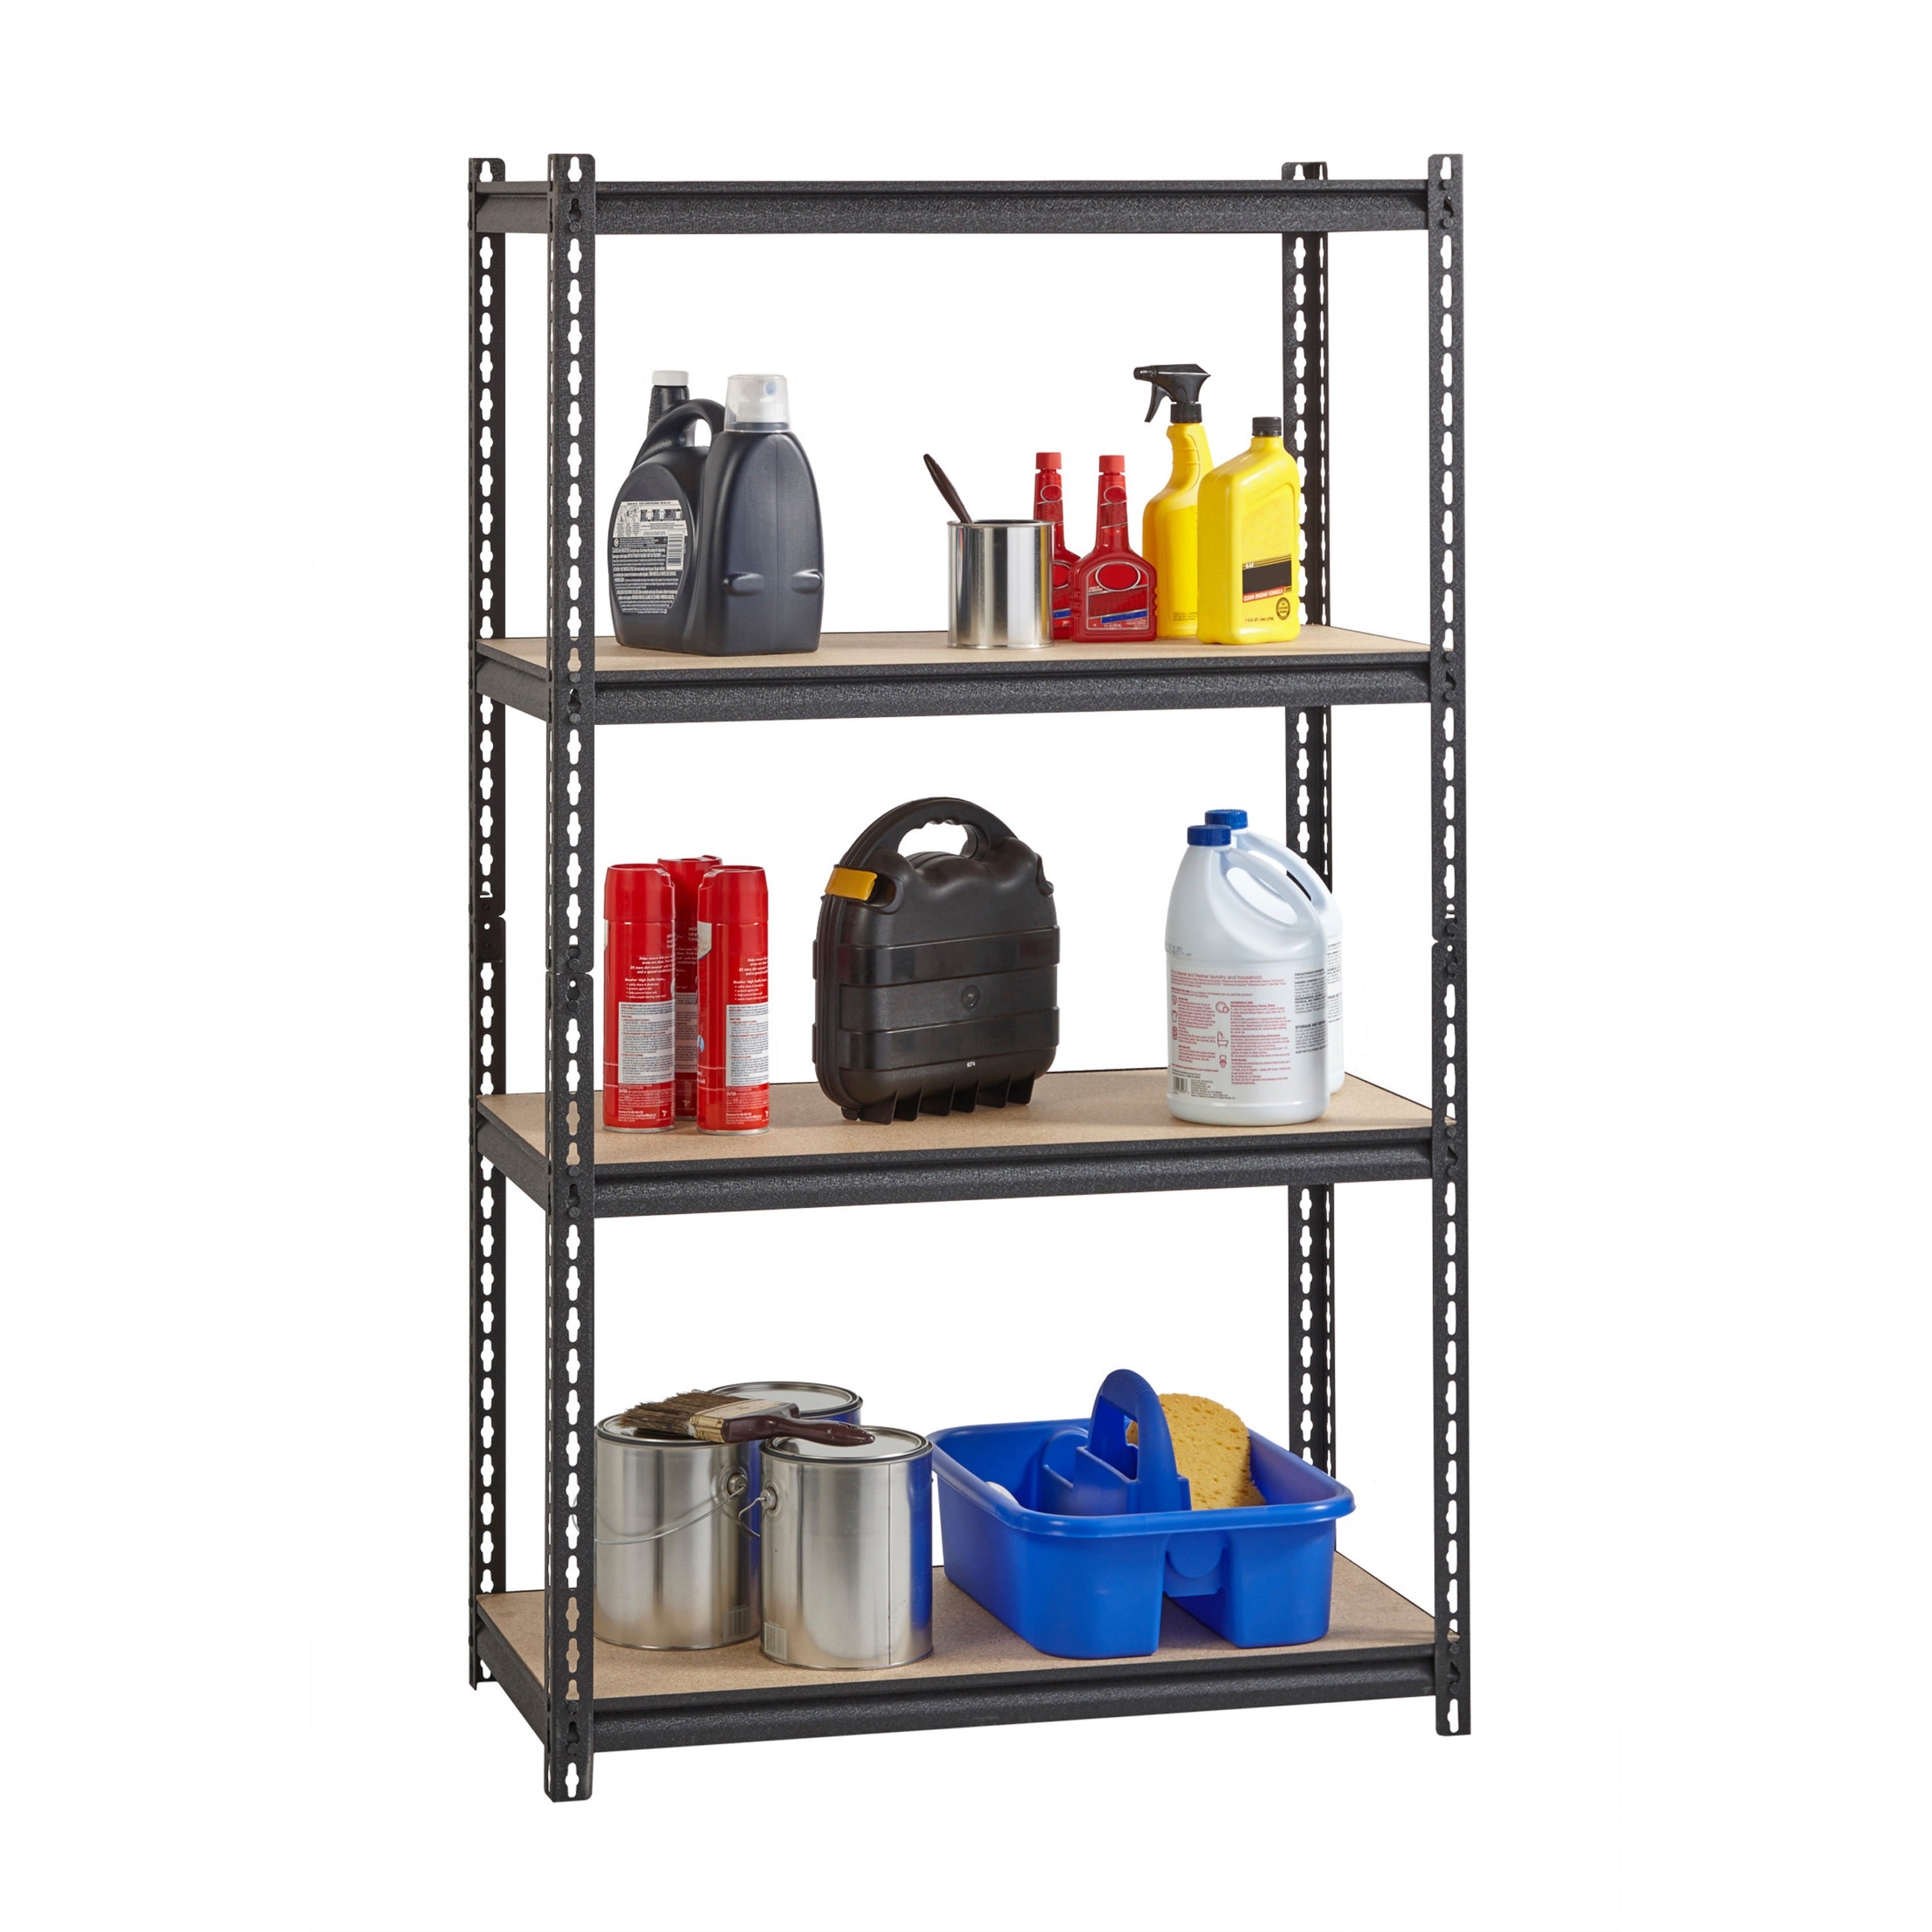 lorell-iron-horse-2300-lb-capacity-riveted-shelving-4-shelfves-60-height-x-36-width-x-18-depth-30%-recycled-black-steel-particleboard-1-each_llr59696 - 4